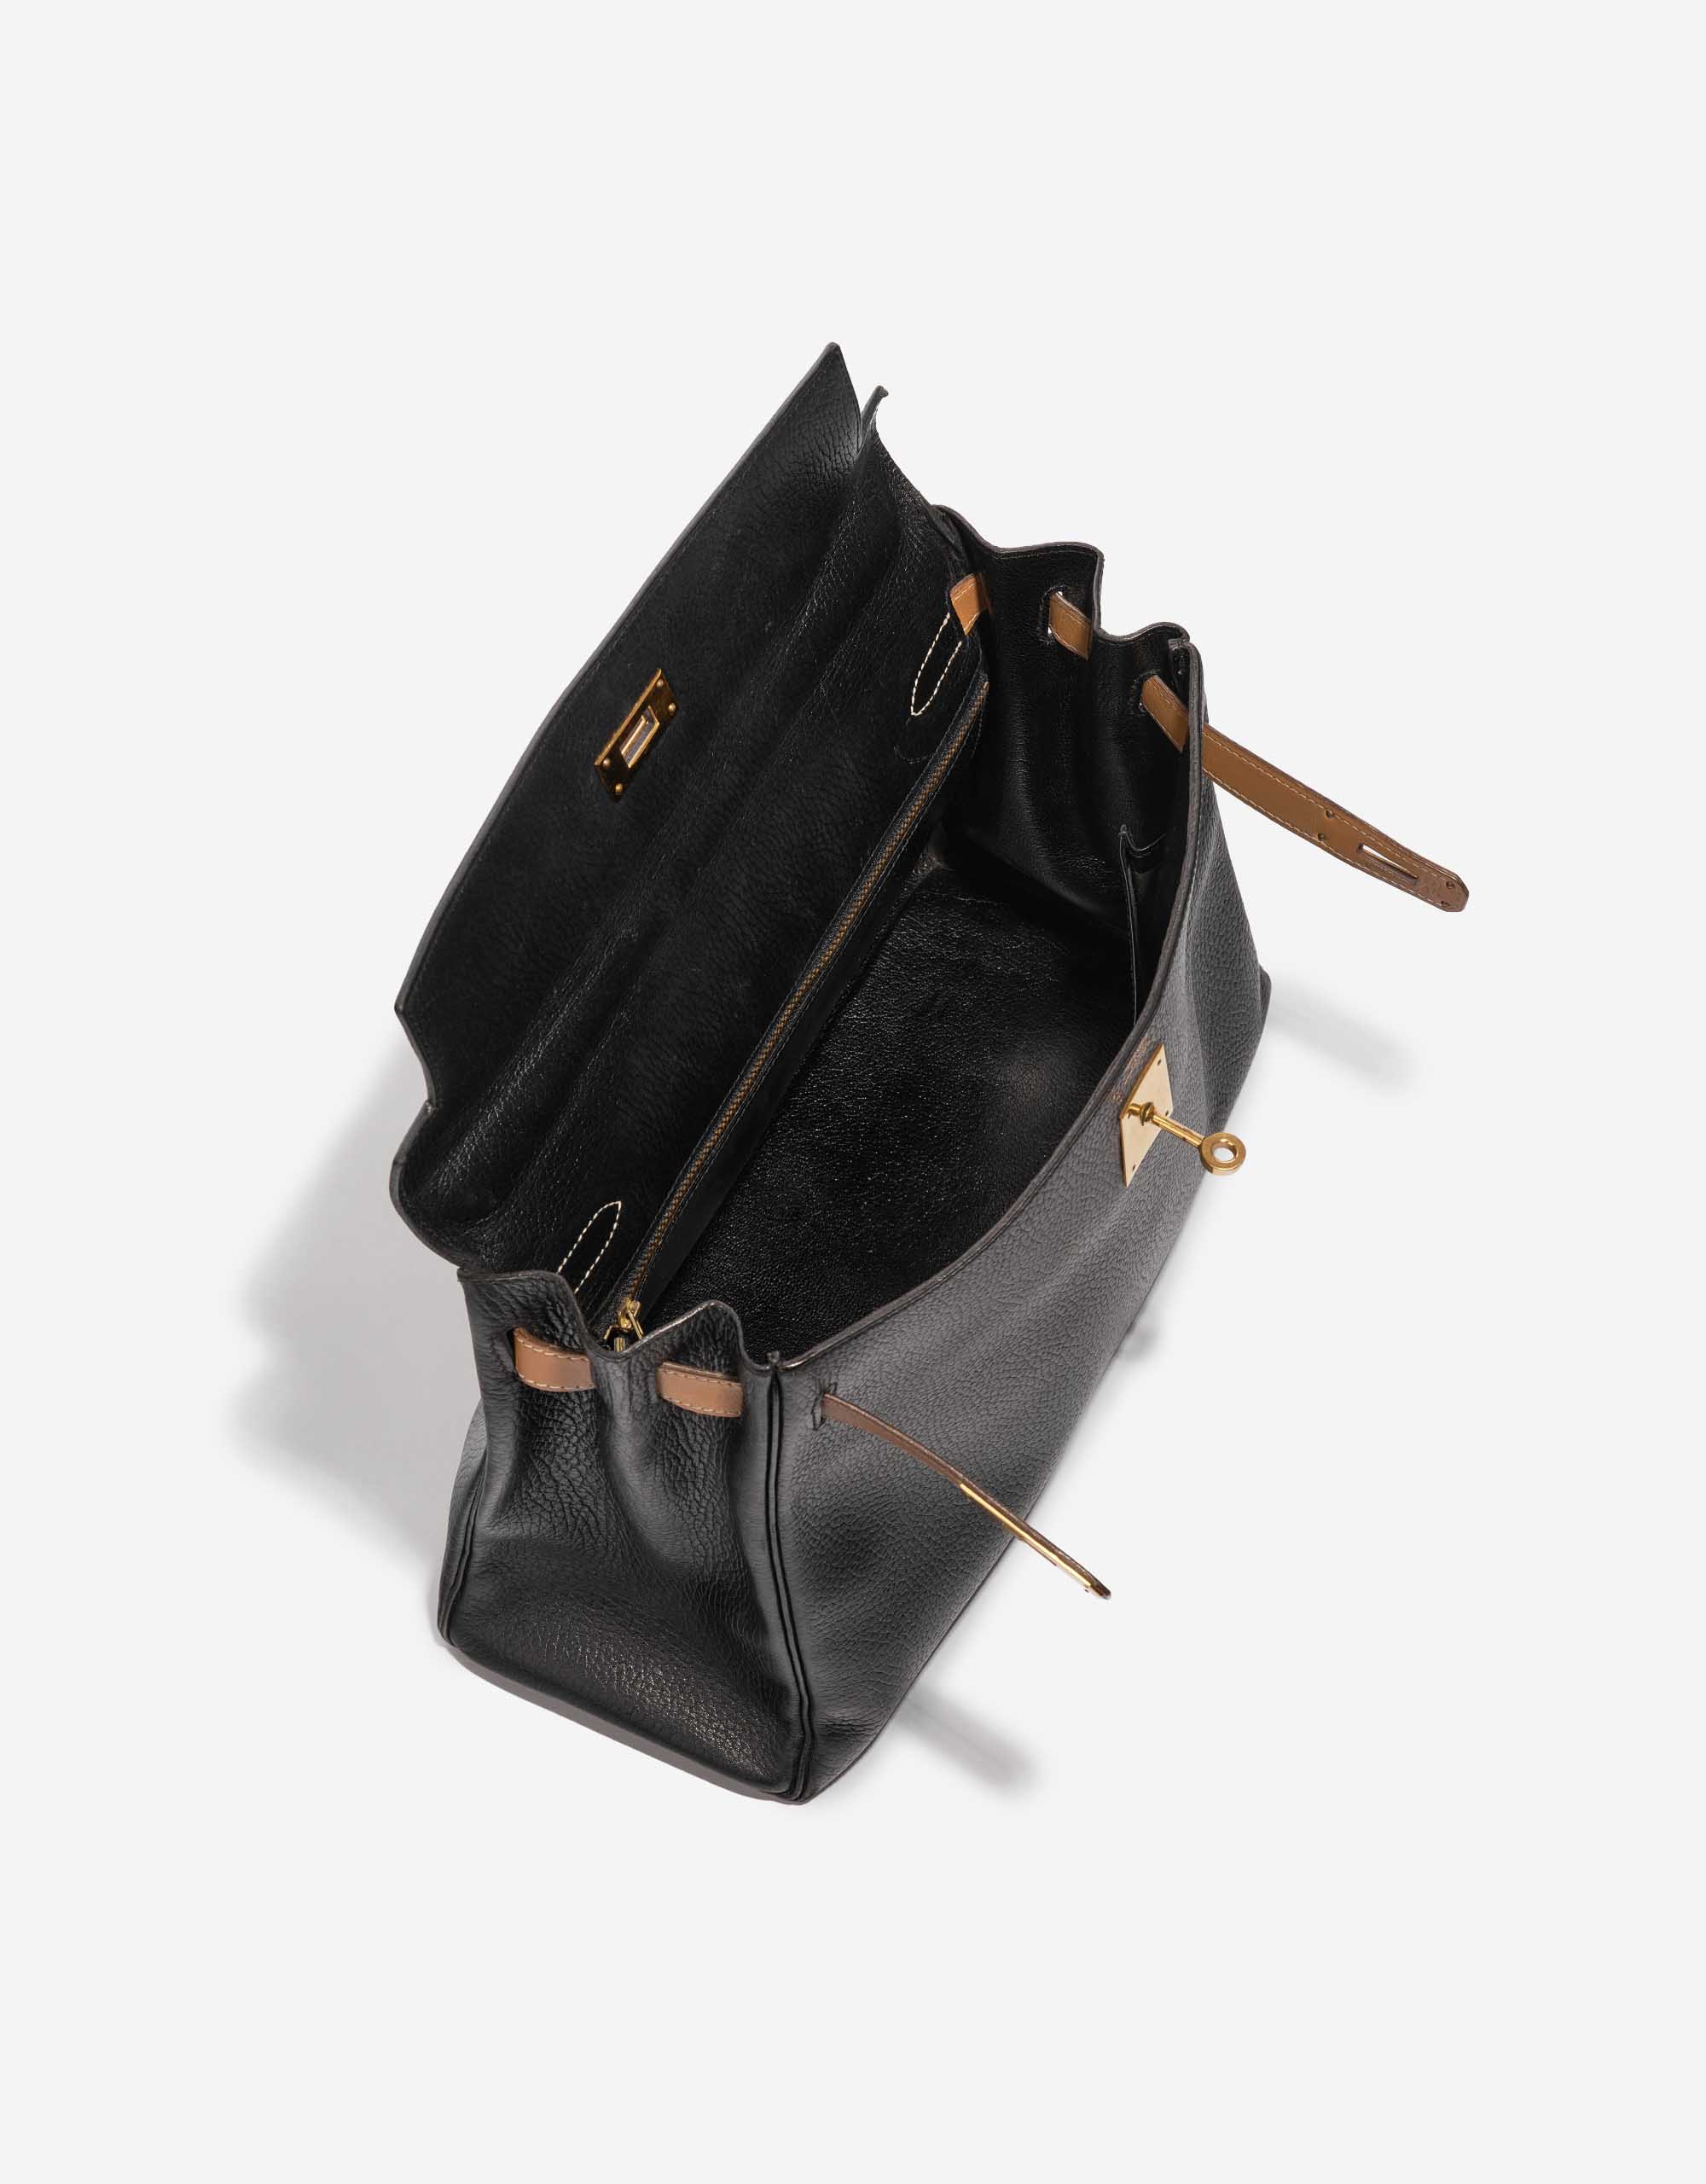 HERMÈS  BLACK ARDENNES KELLY SELLIER 32 WITH GOLD HARDWARE